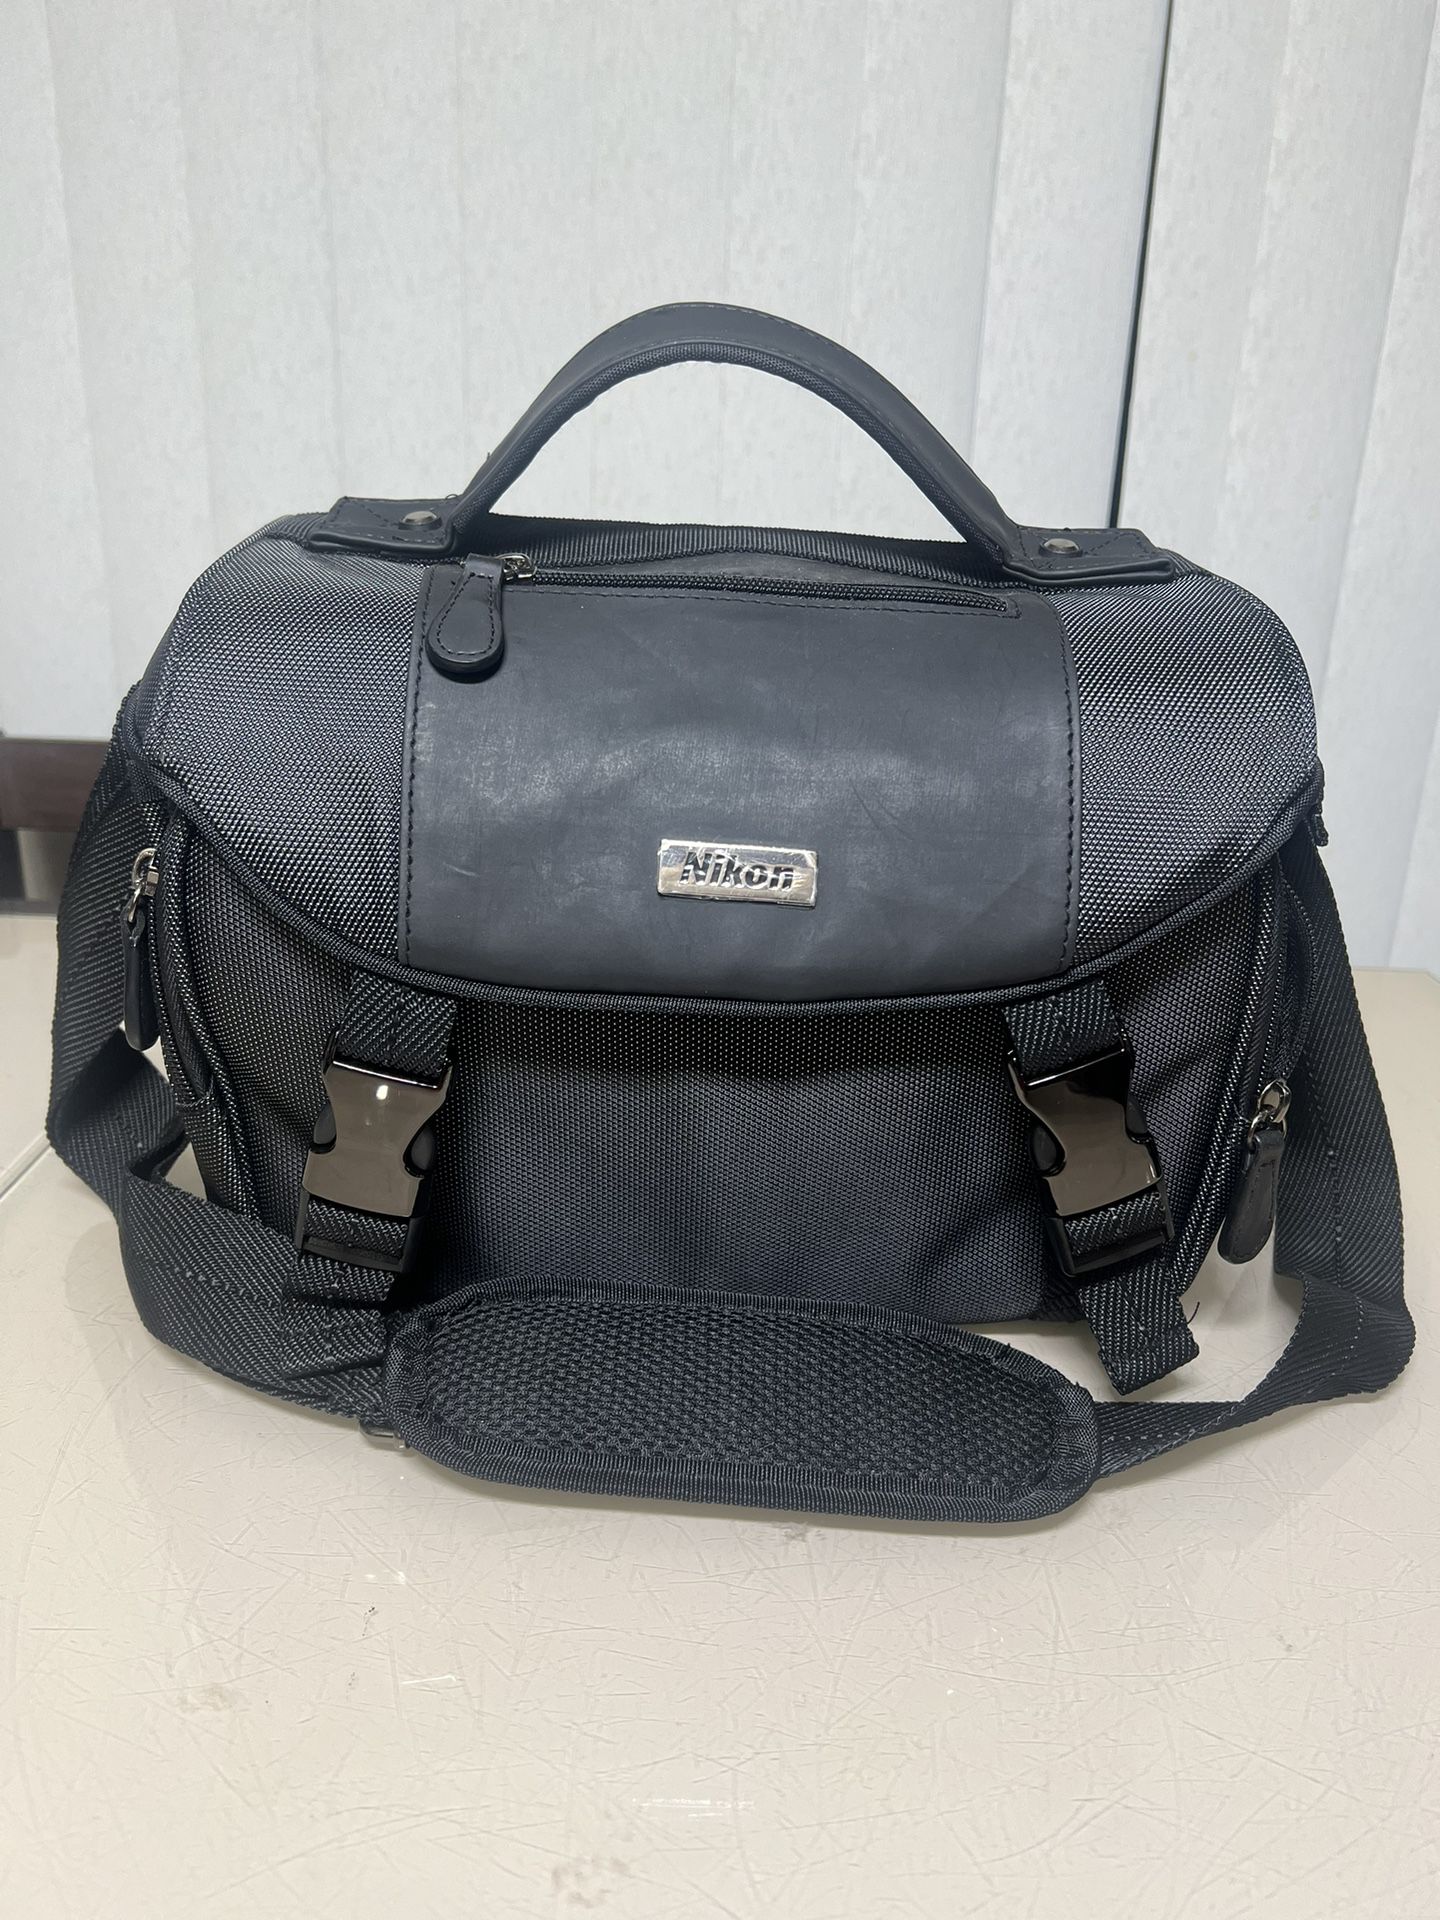 Genuine Nikon Digital SLR DSLR Padded Shoulder Camera Case Bag Black. Used in good cosmetic condition with normal signs of usage. Bag is in great shap